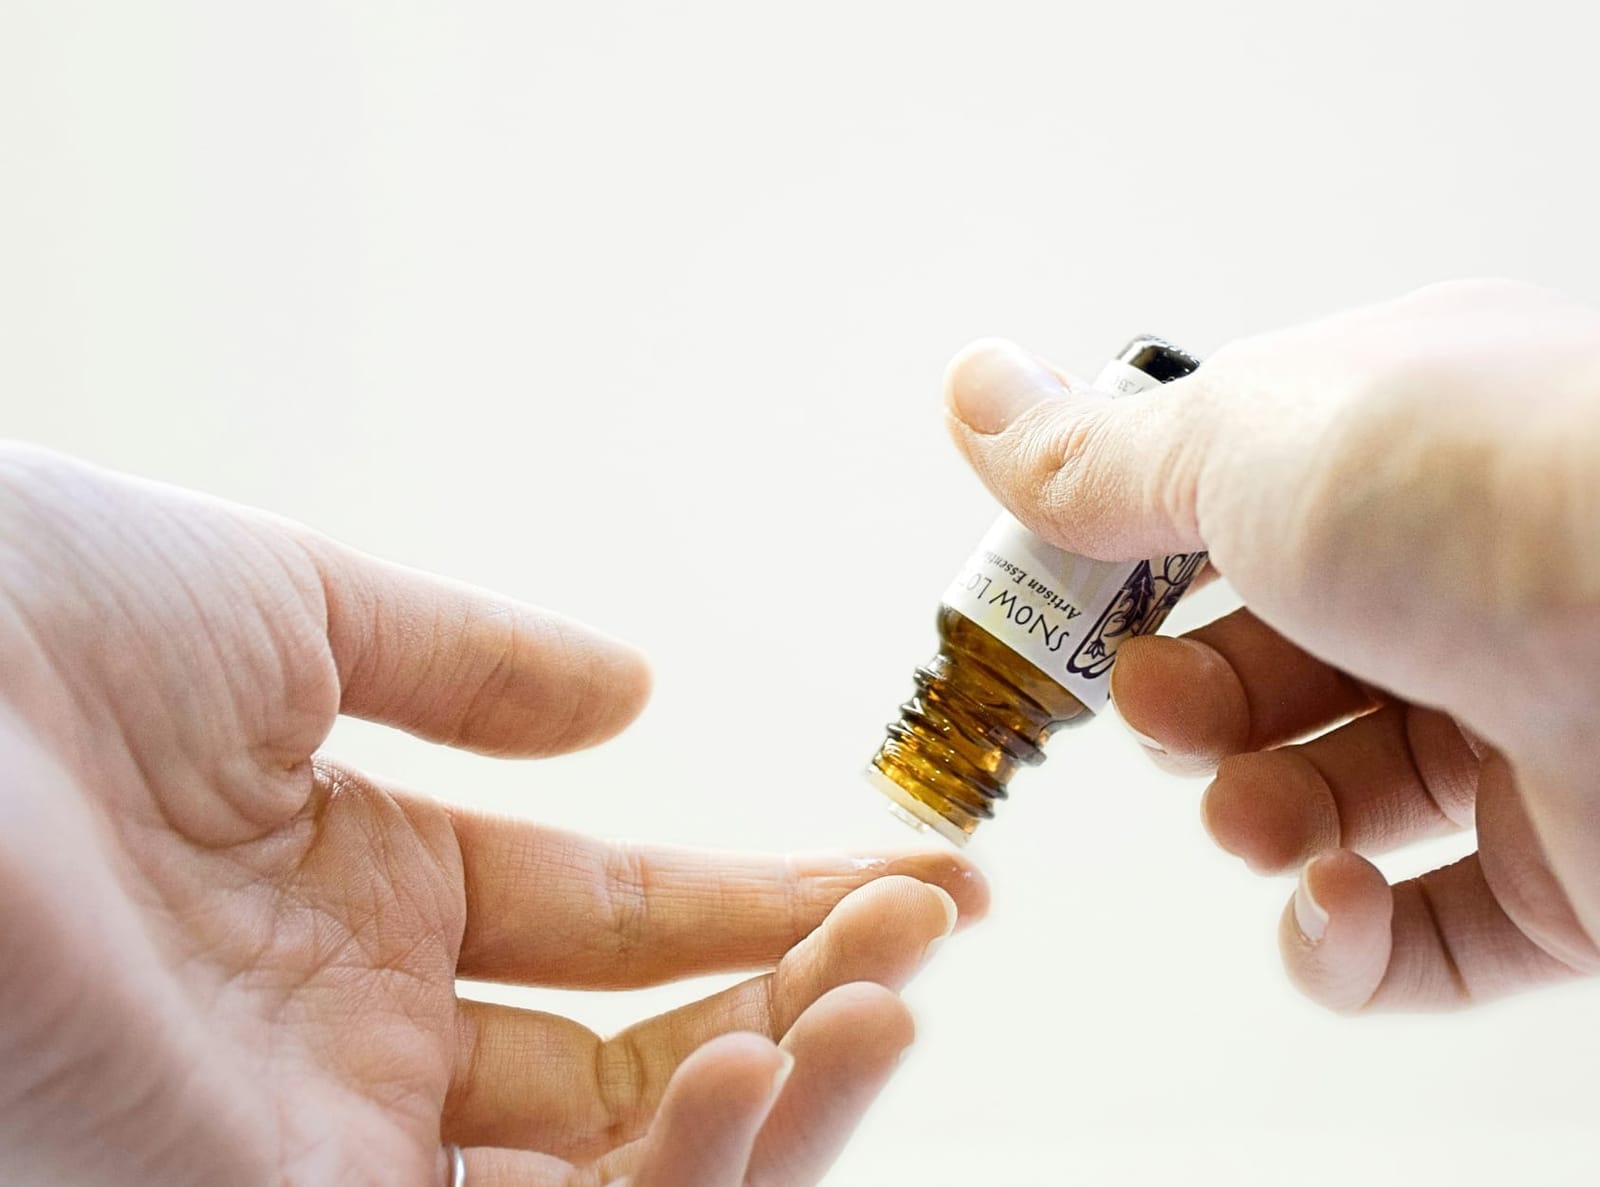 Photograph of hands holding an essential oil bottle